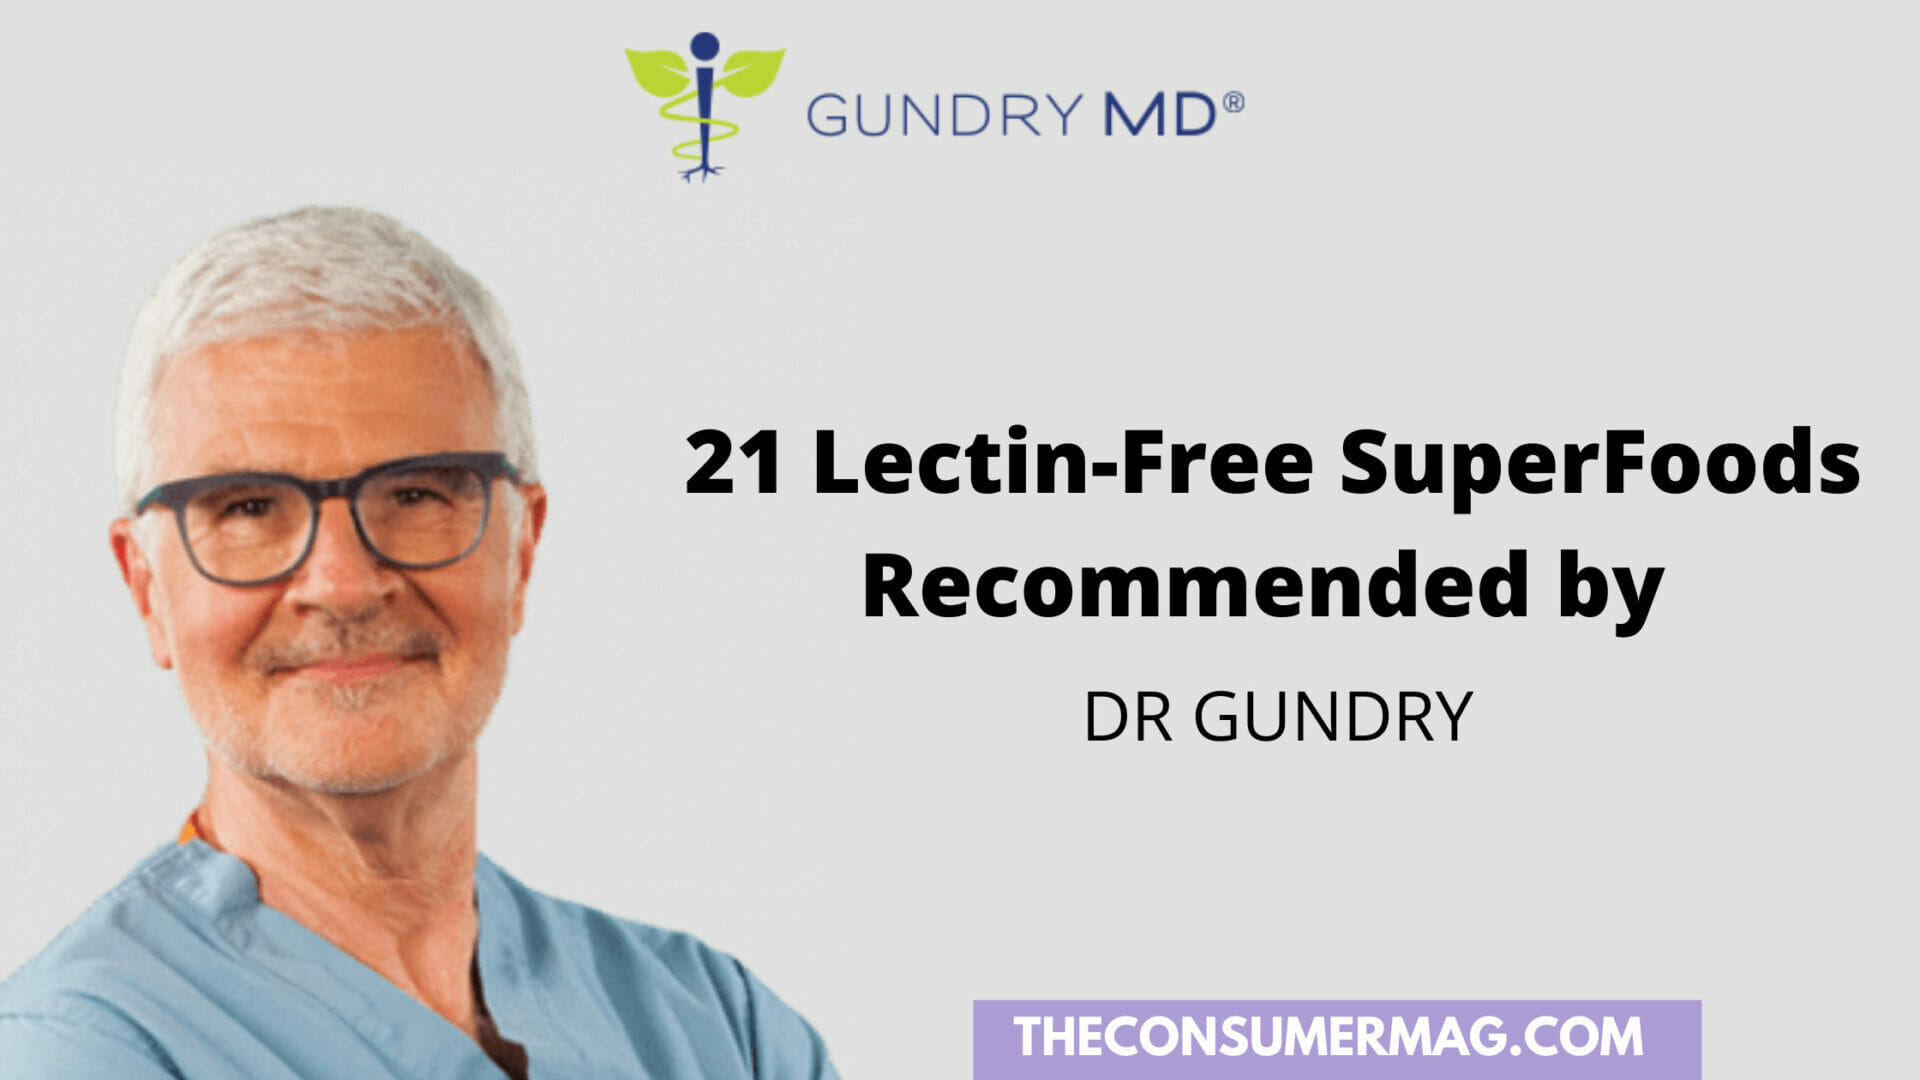 21 Lectin-Free Superfoods Recommended by Dr. Gundry |Ultimate Guide|